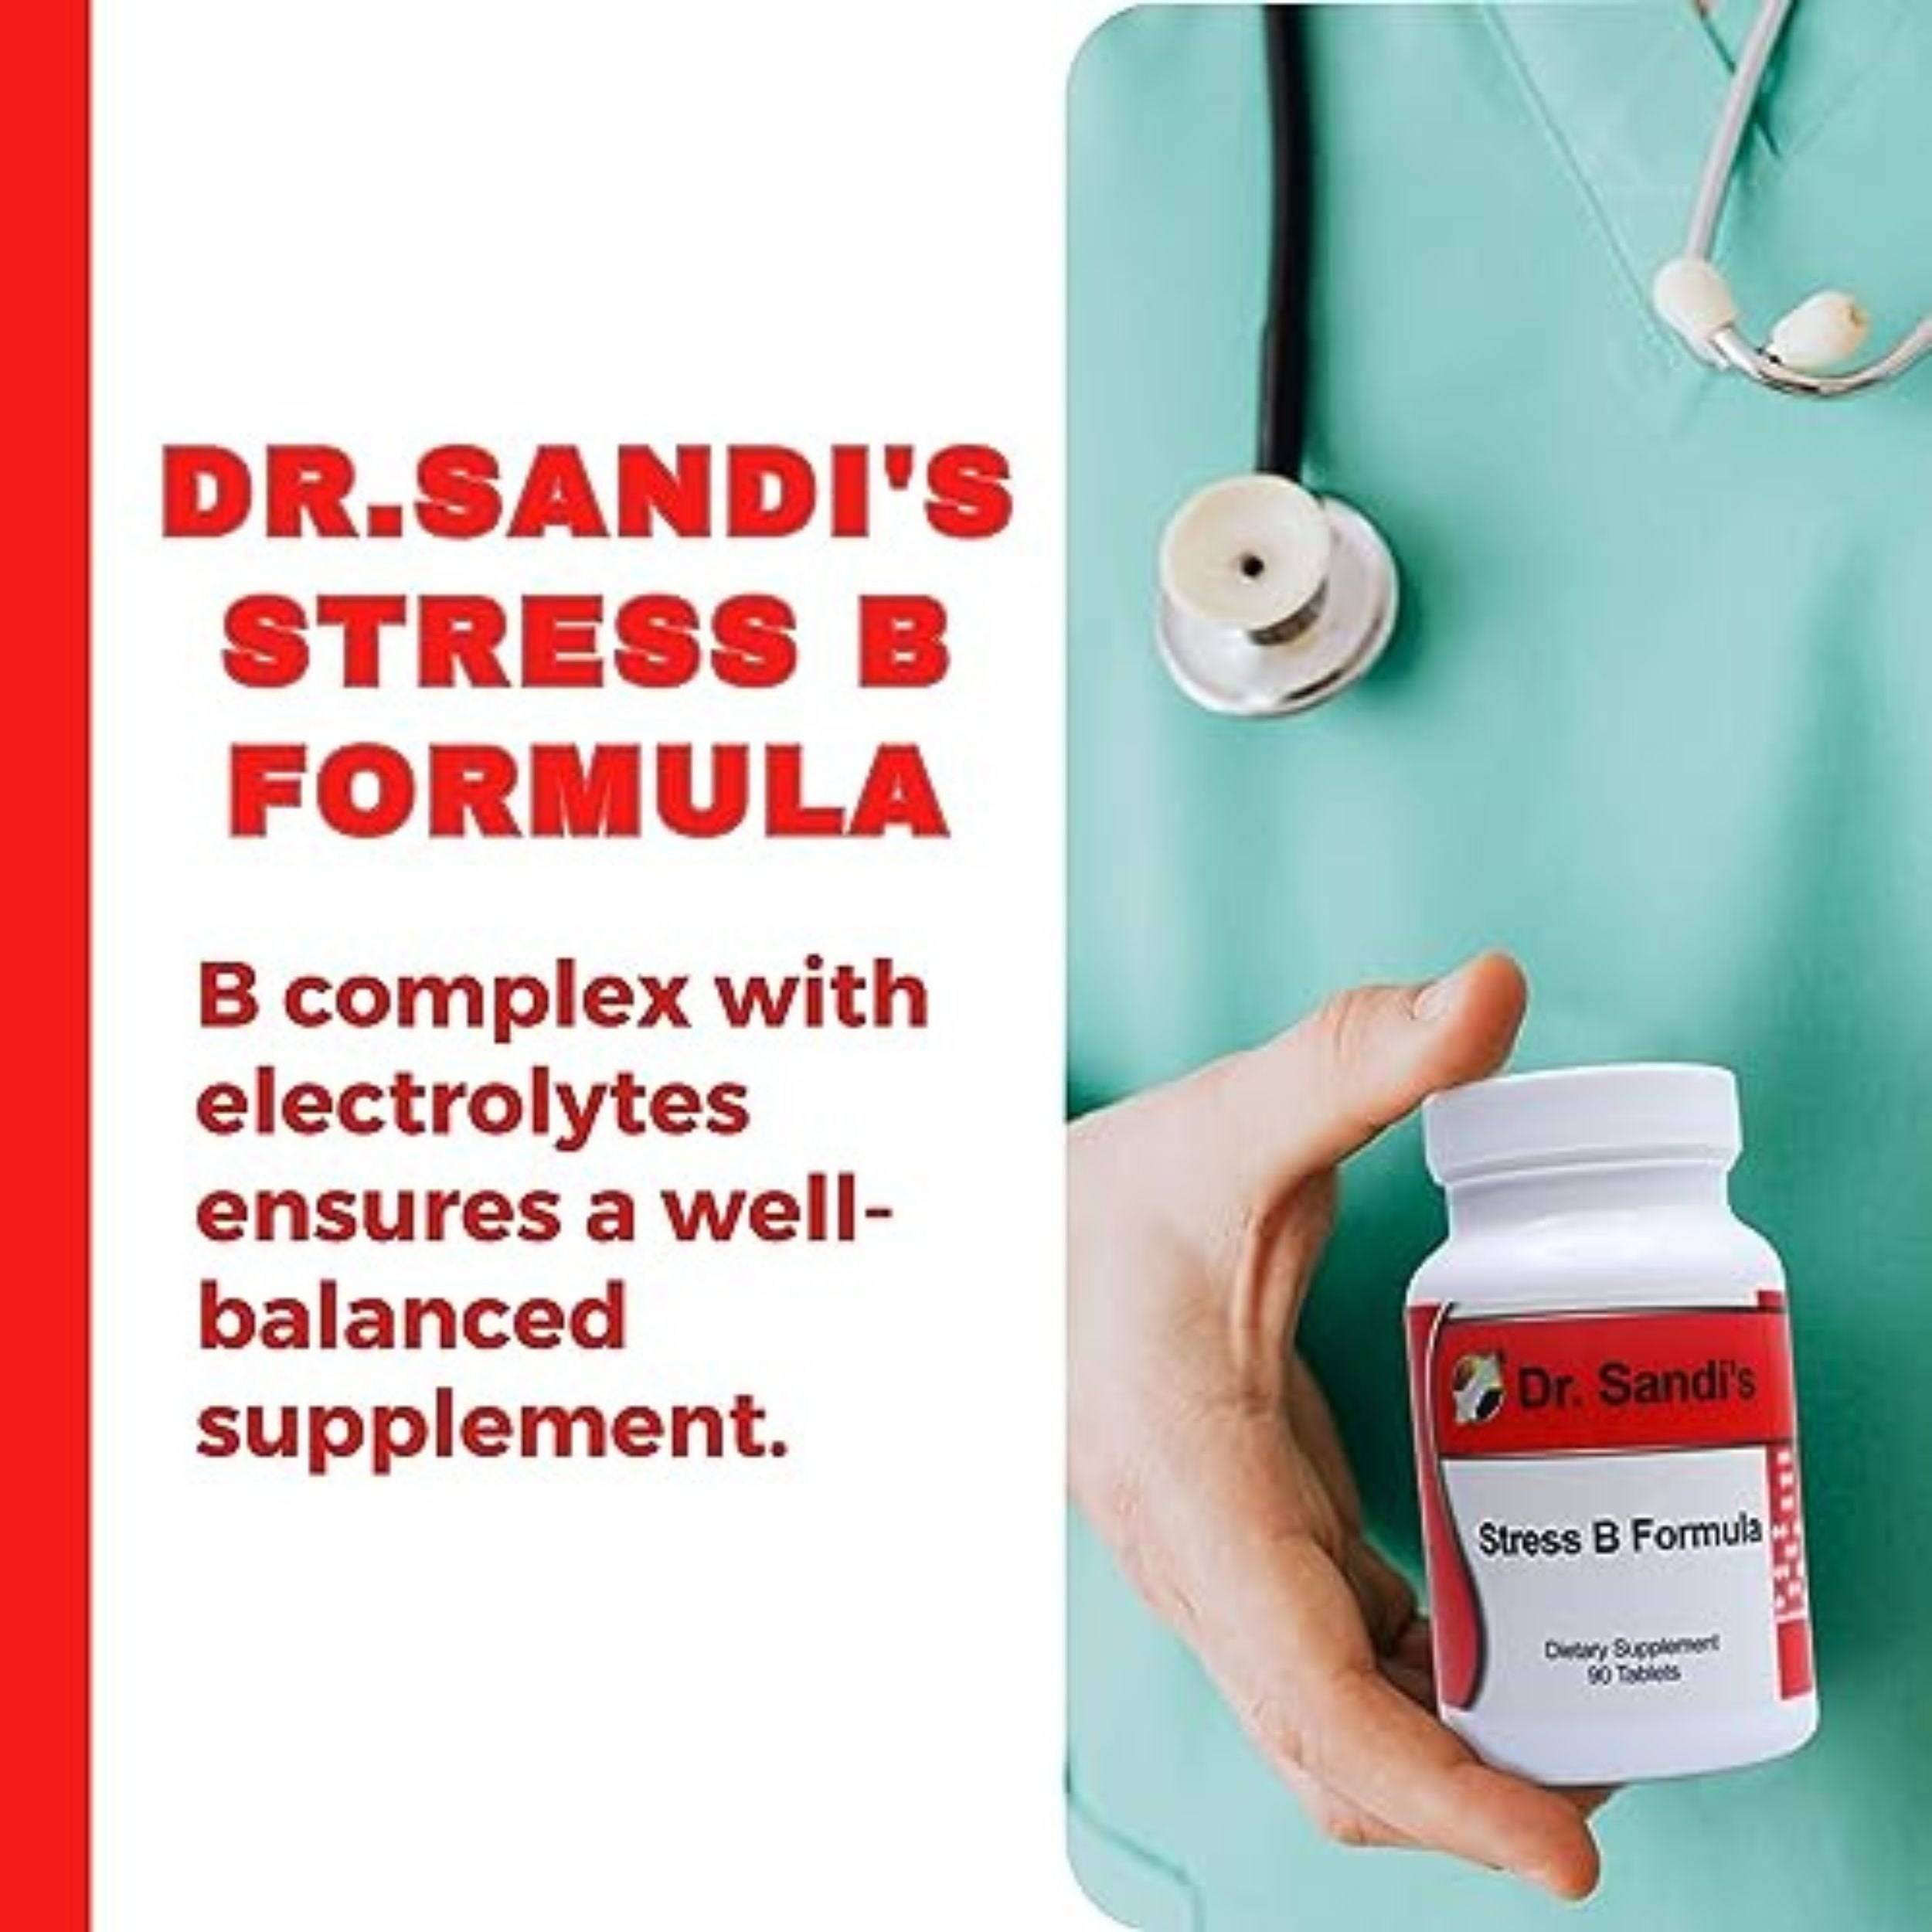 Dr. Sandi's Stress B Formula - B Complex Vitamins For Men and Women - Vitalizing B Complex Vitamin Supplement for Women and Men with B12 Complex - 90 Count Vitamin B Complex with Electrolytes